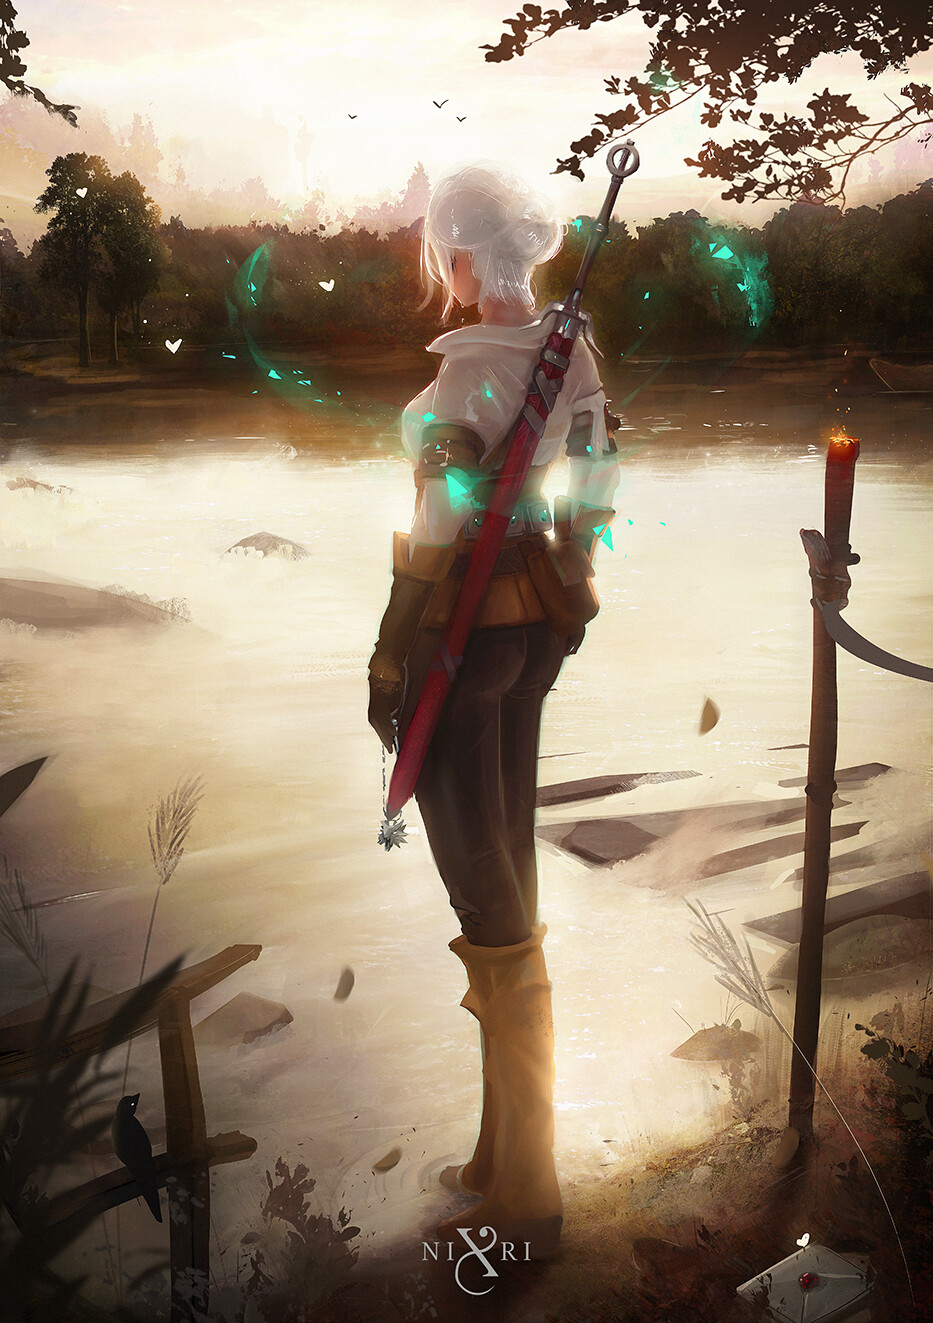 General 933x1323 The Witcher The Witcher 3: Wild Hunt The Witcher 3: Wild Hunt - Blood and Wine Cirilla Fiona Elen Riannon Nixri video game girls video game characters women white hair sword back river artwork fan art illustration digital art